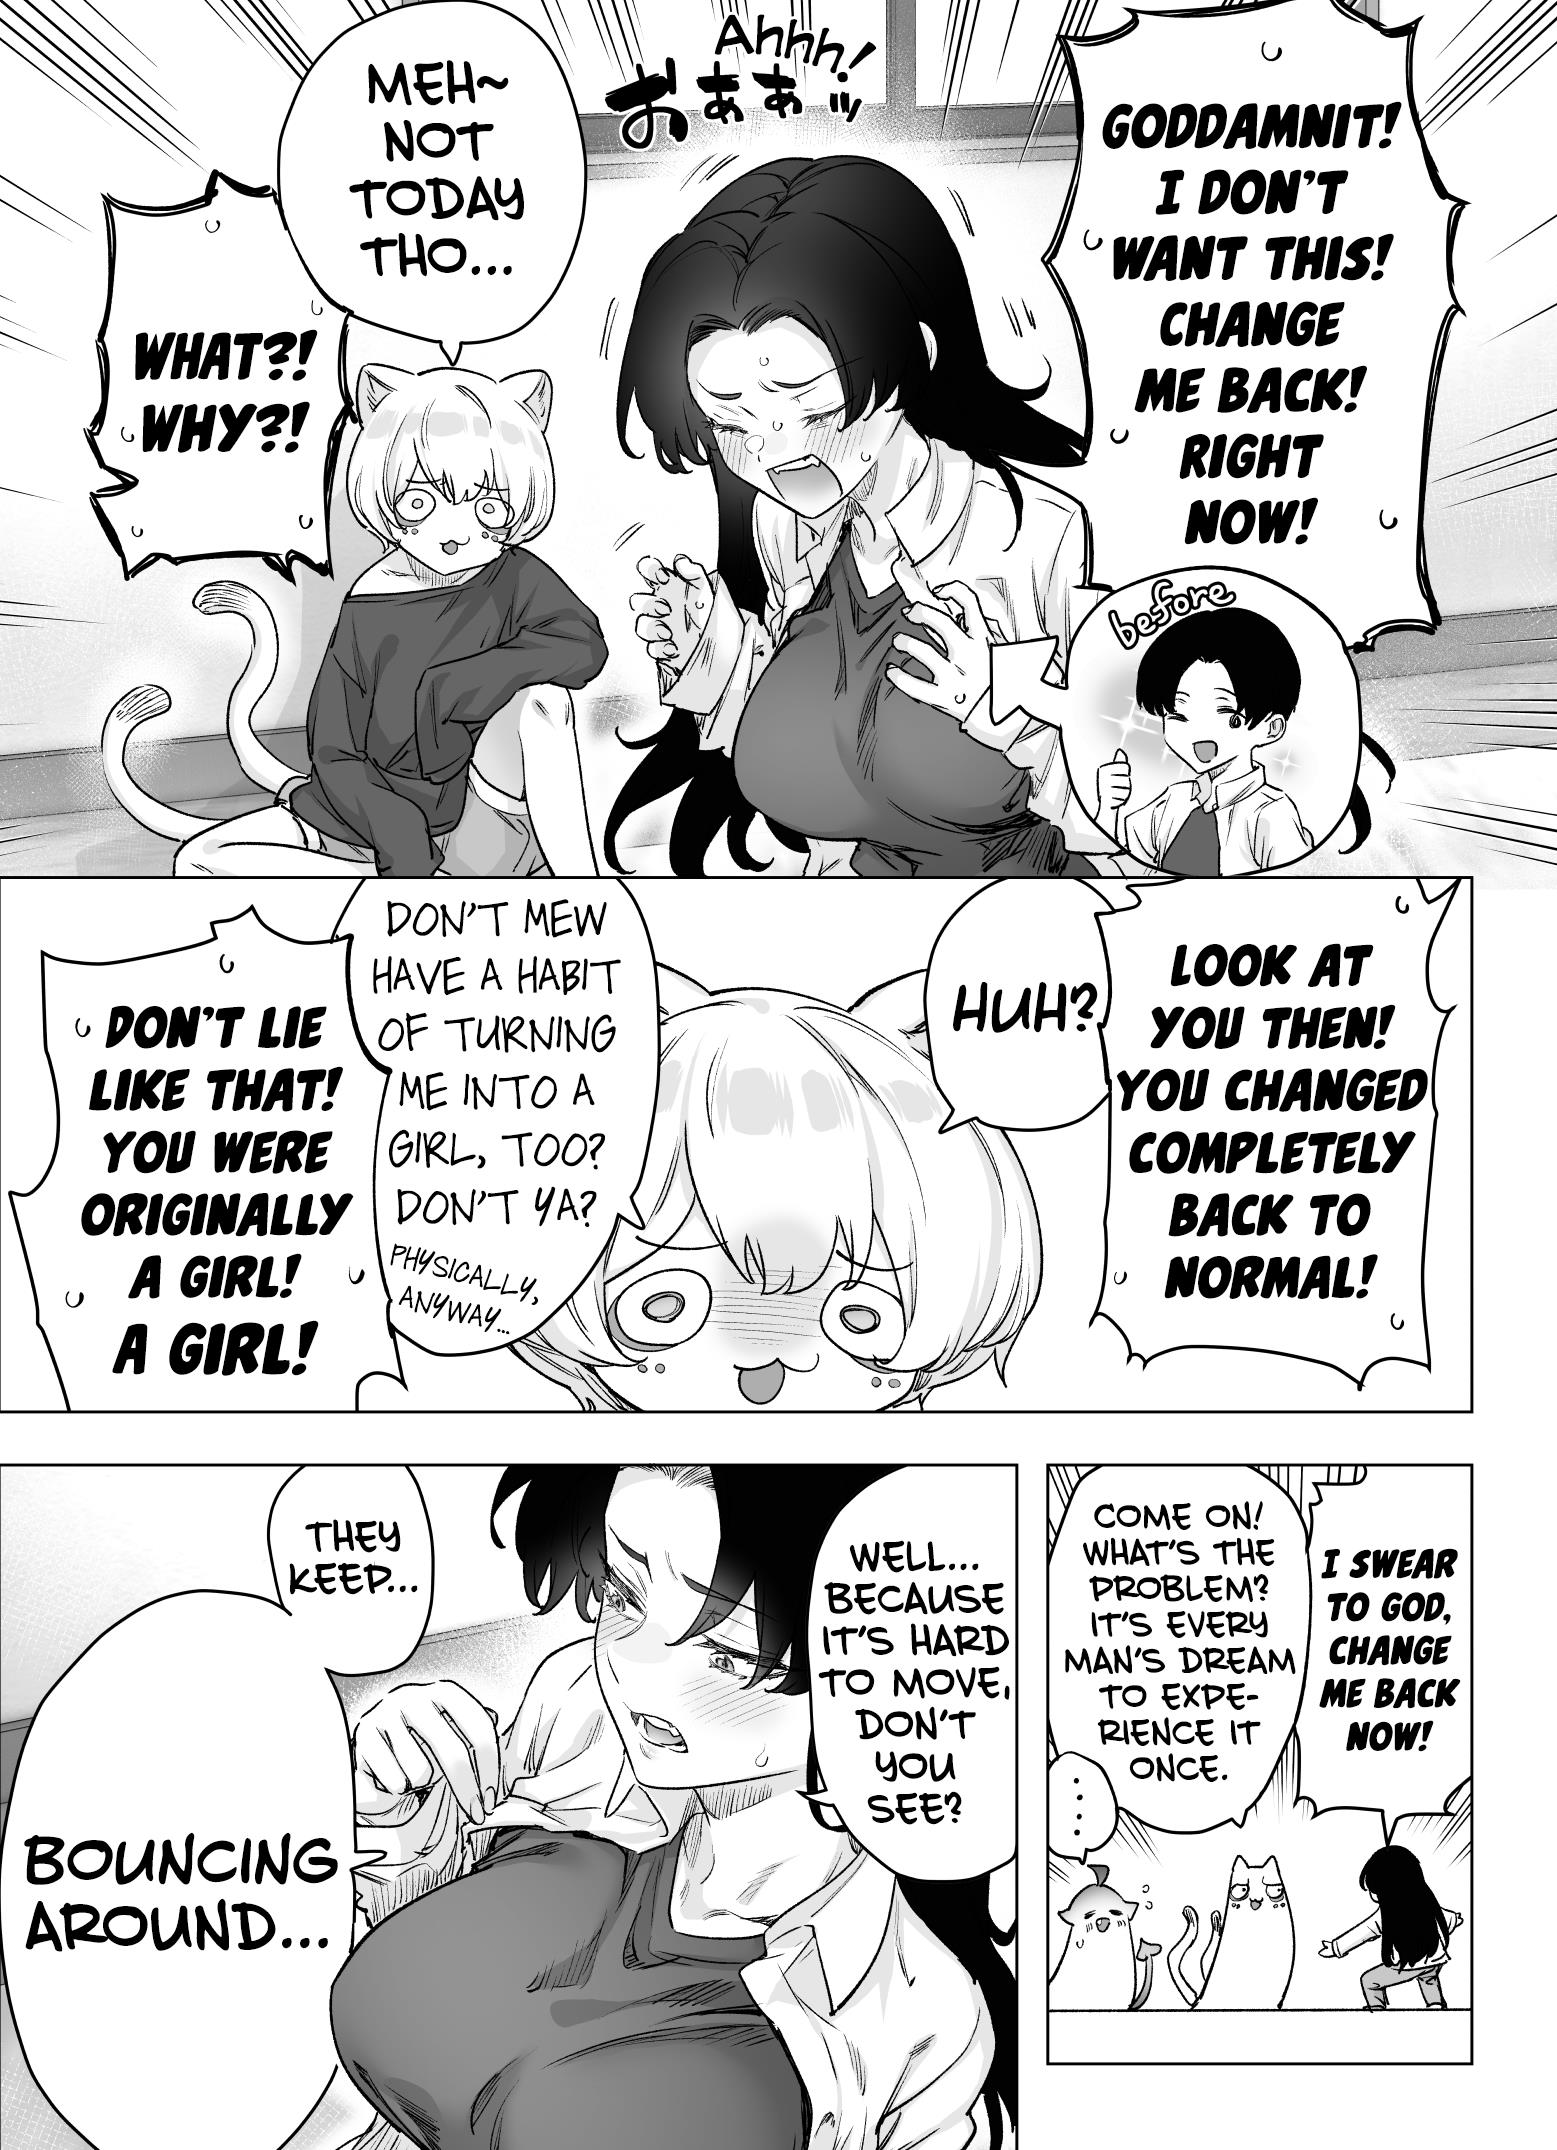 Even Though She's The Losing Heroine, The Bakeneko-Chan Remains Undaunted - Page 1